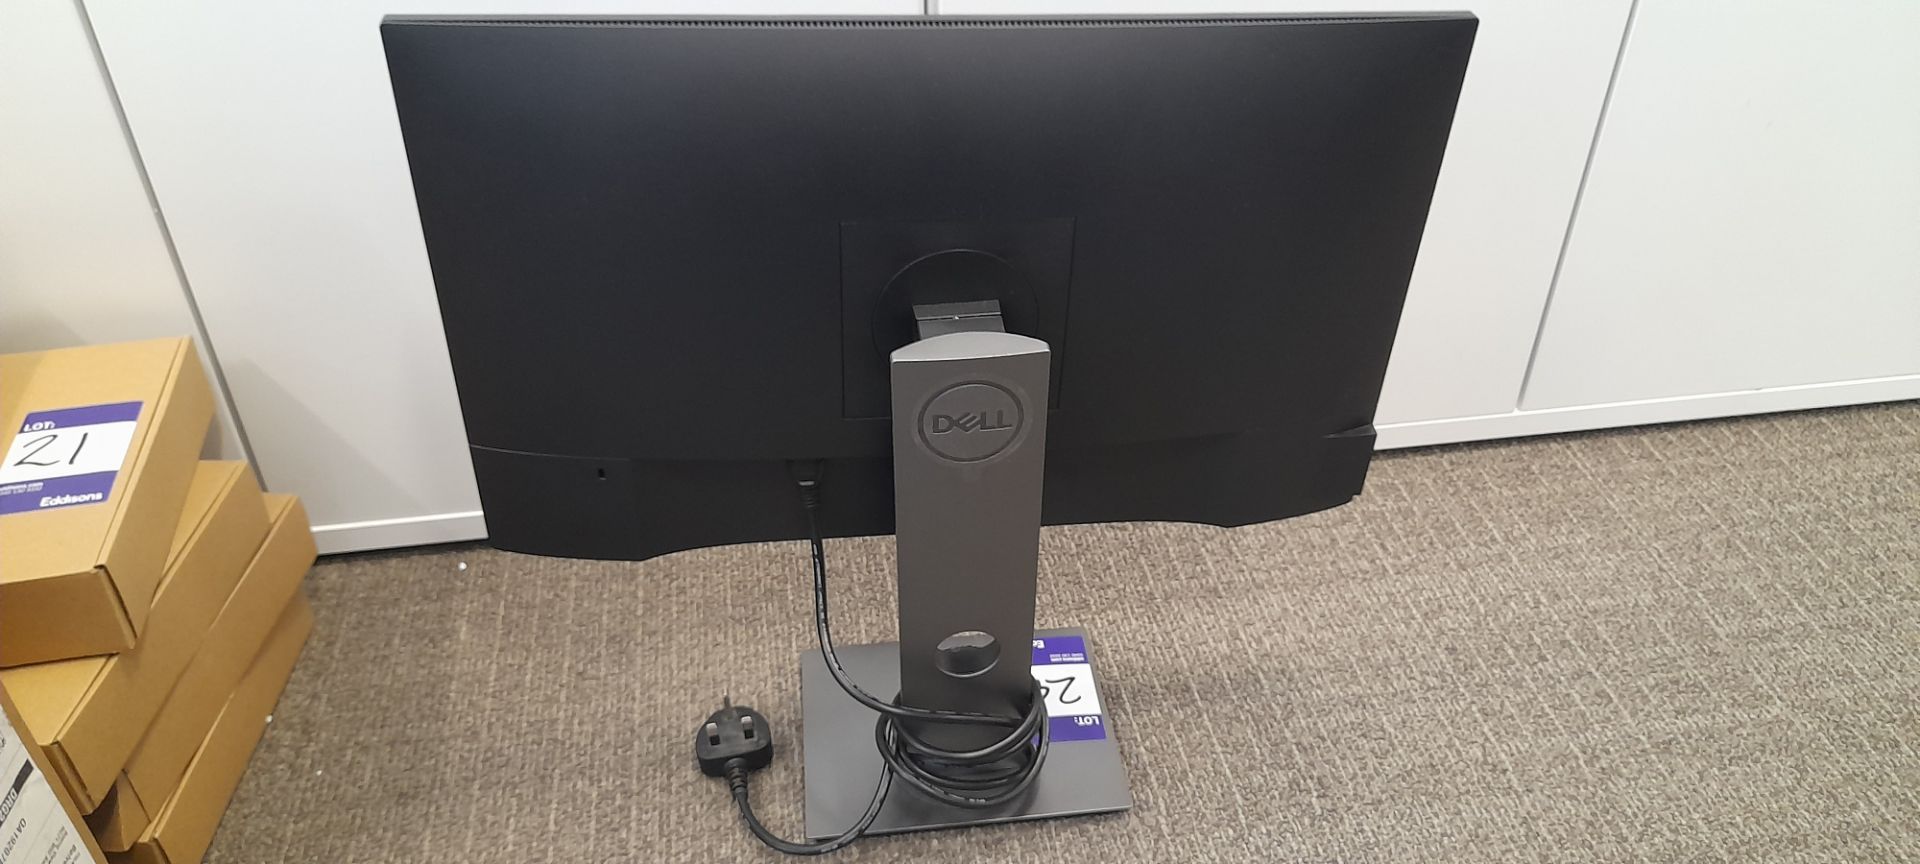 Dell 24” flat panel monitor, P2419H, S/N: CN-06YY30-TV100-898-1QYI-A02 - Image 2 of 3